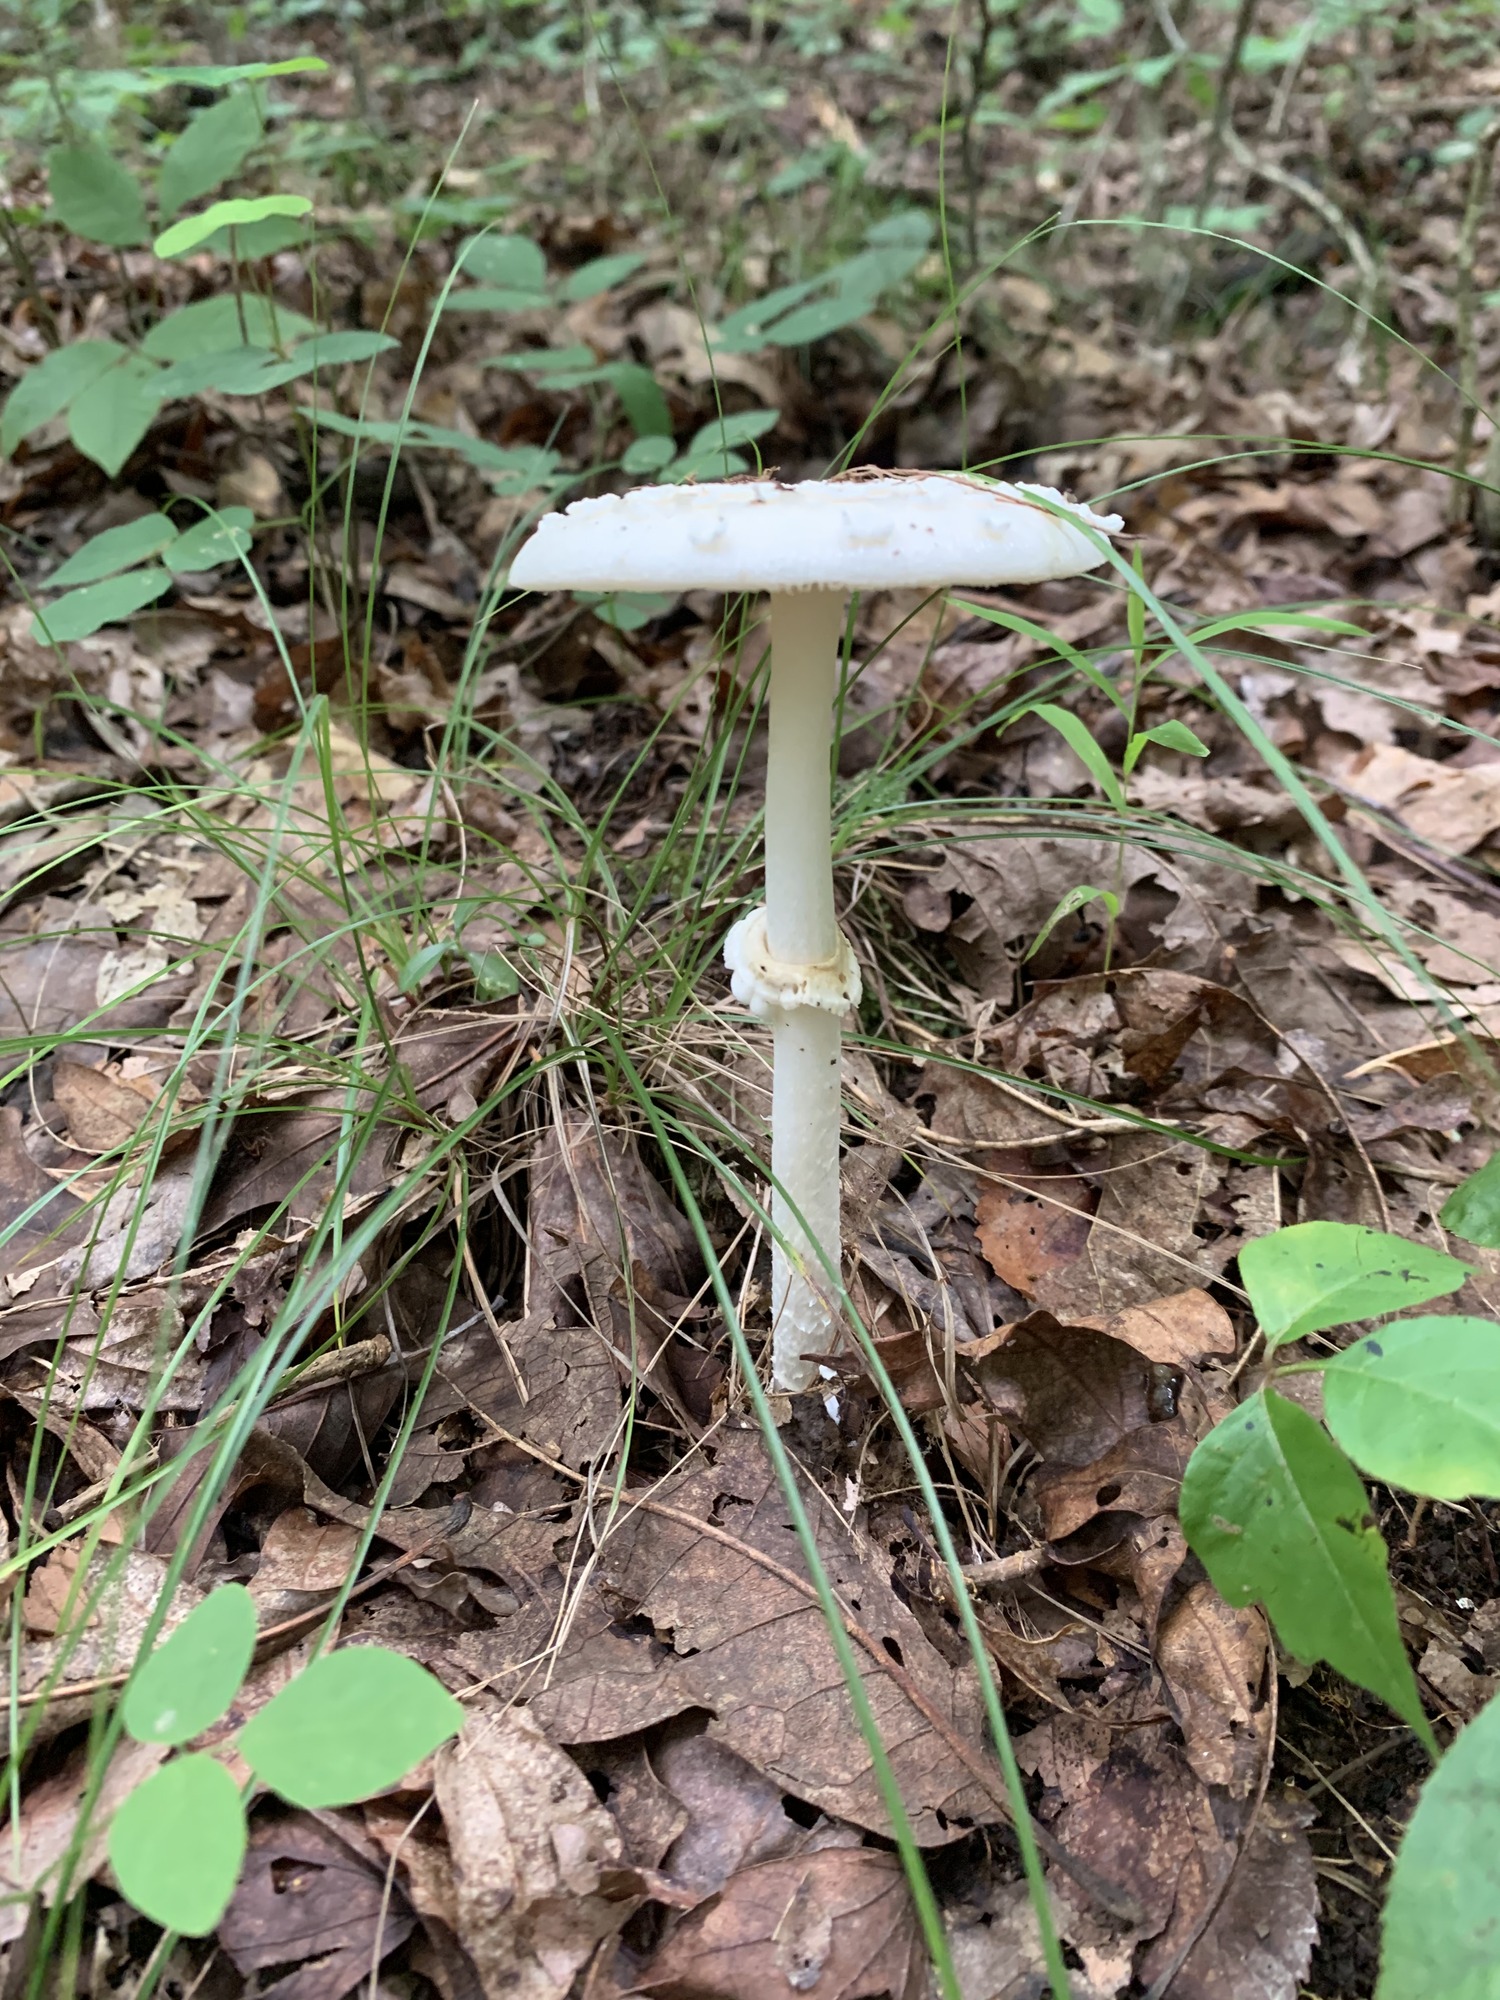 A tall slender white mushroom with a thin cap, growing on the forest floor.